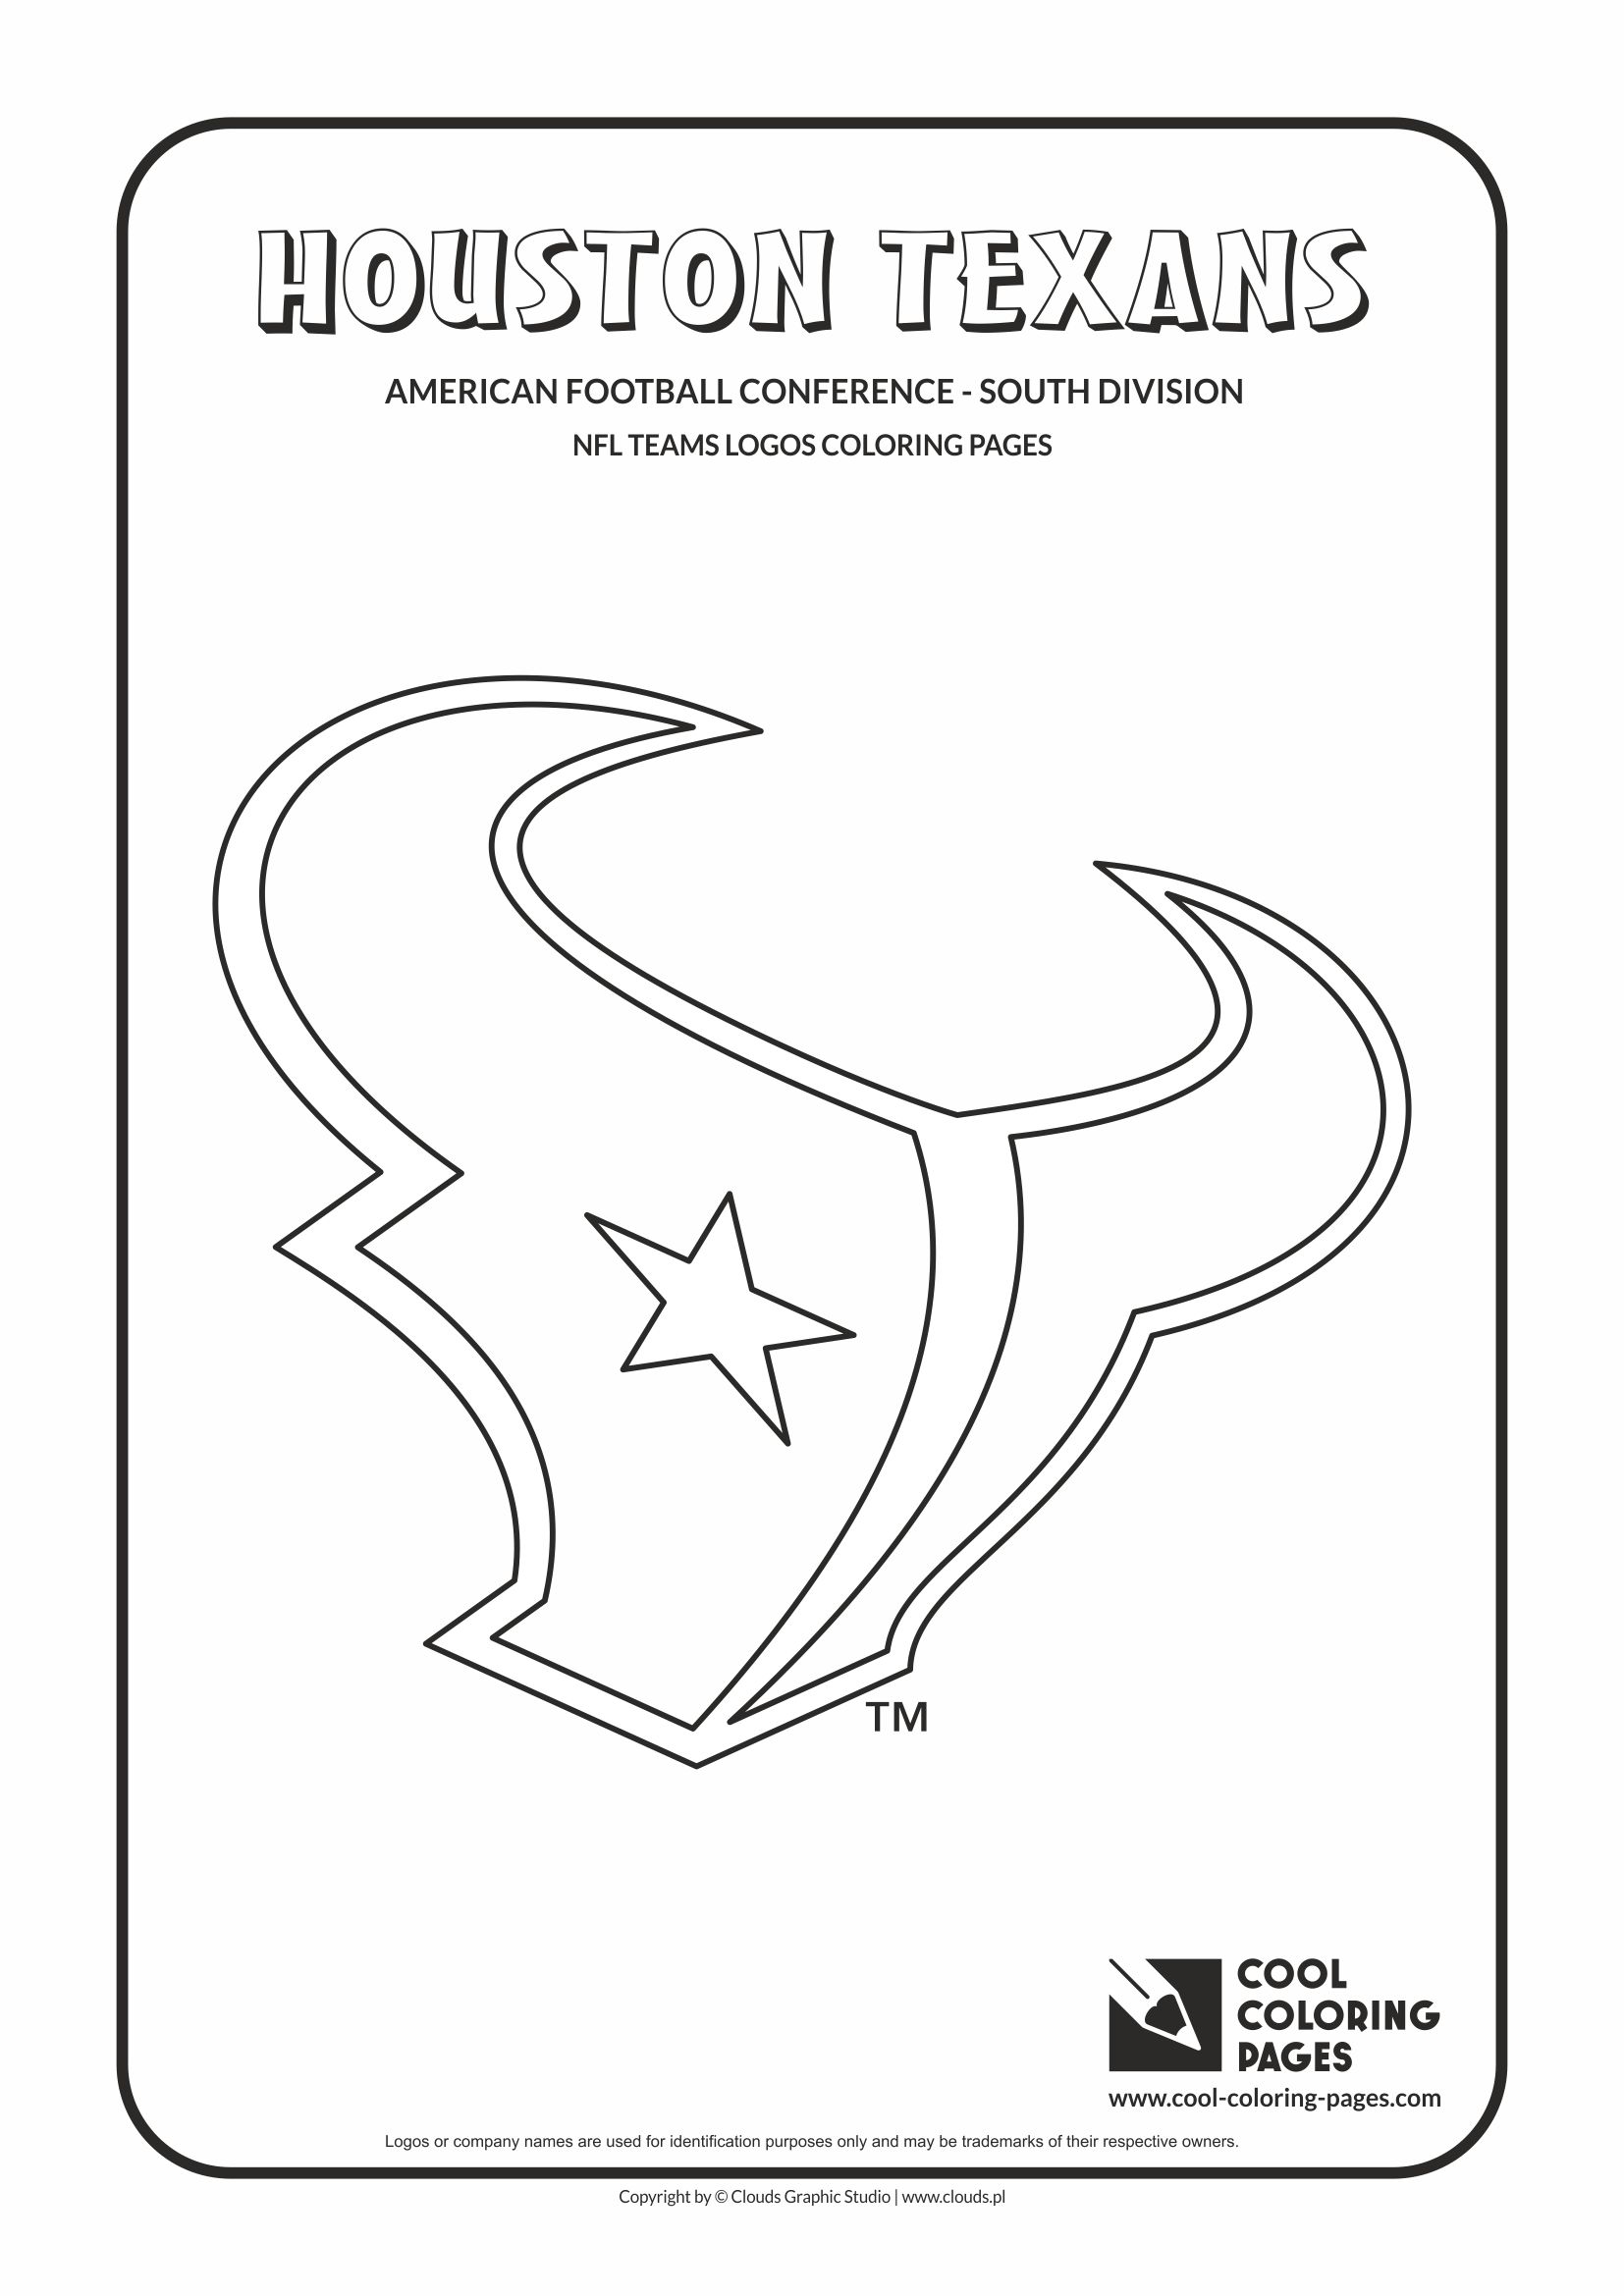 Download Cool Coloring Pages NFL teams logos coloring pages - Cool Coloring Pages | Free educational ...